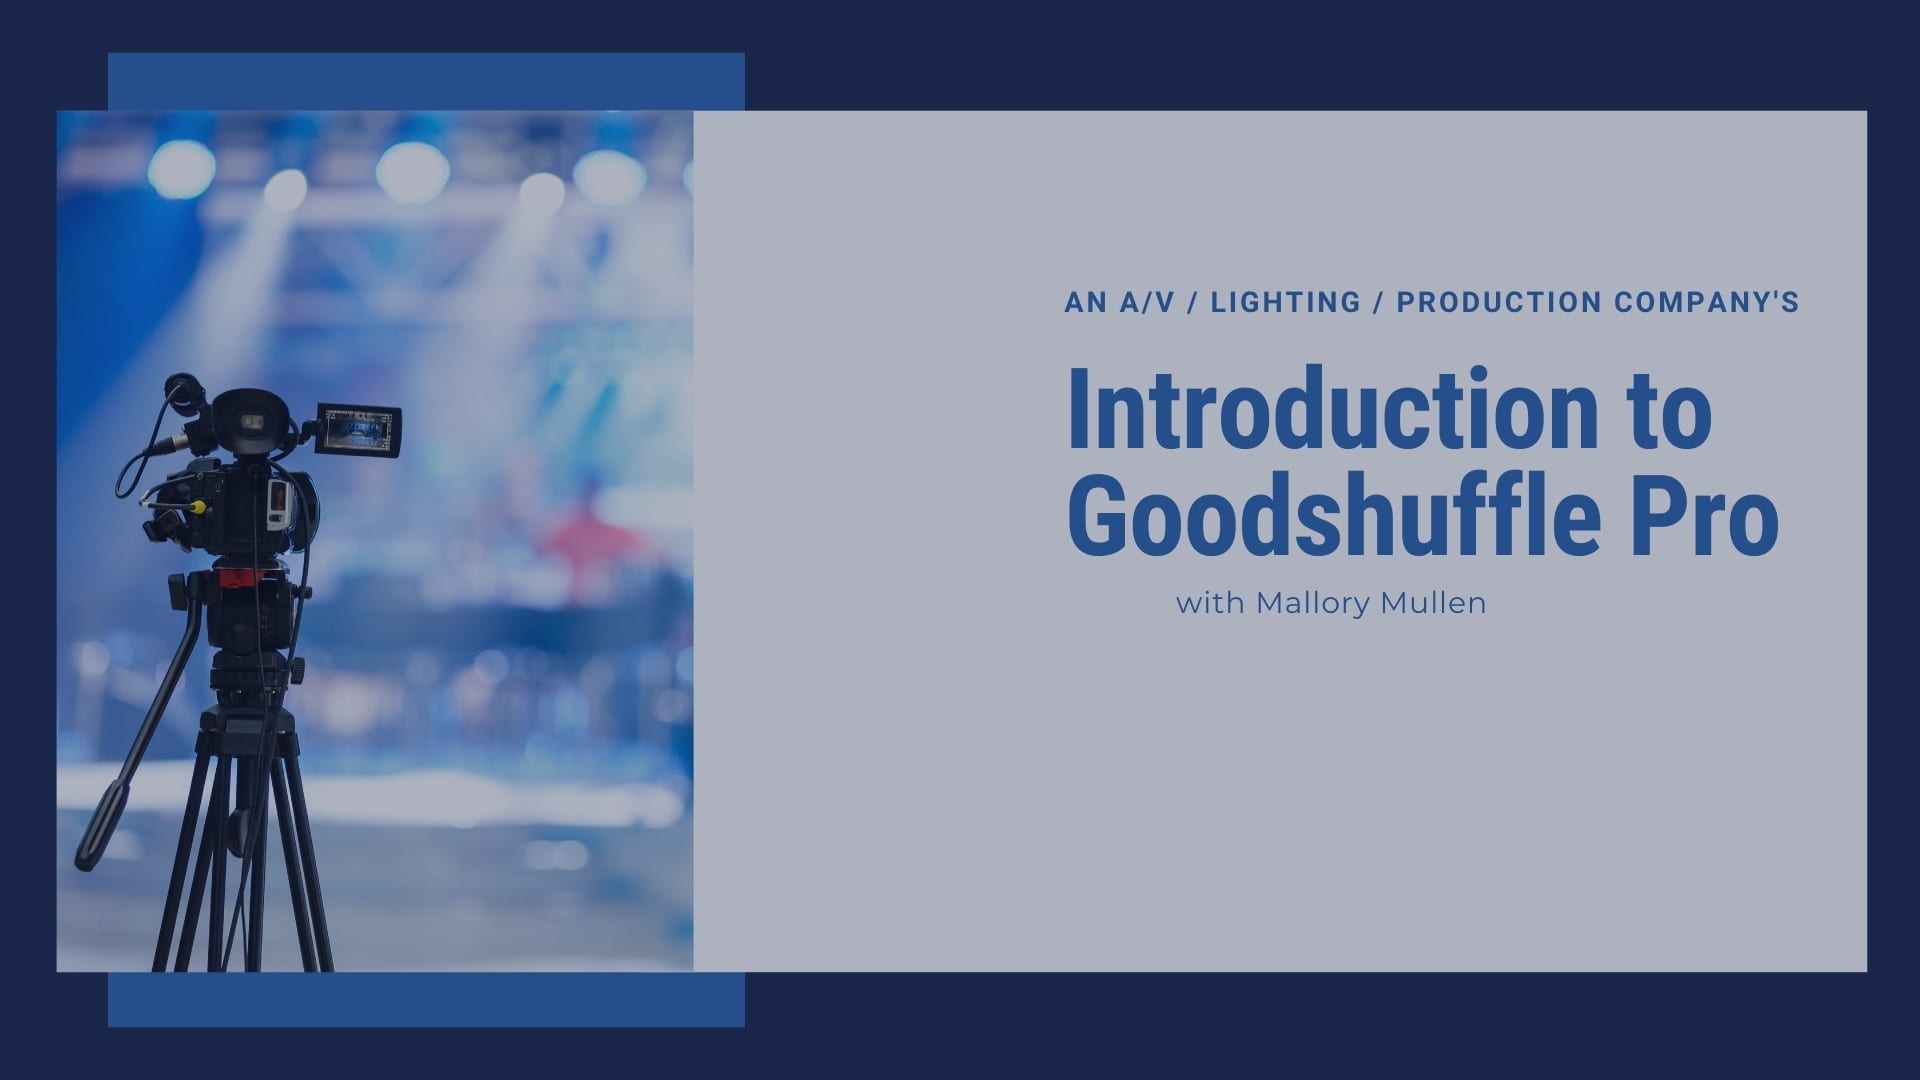 Introduction to Goodshuffle Pro for event lighting and production companies